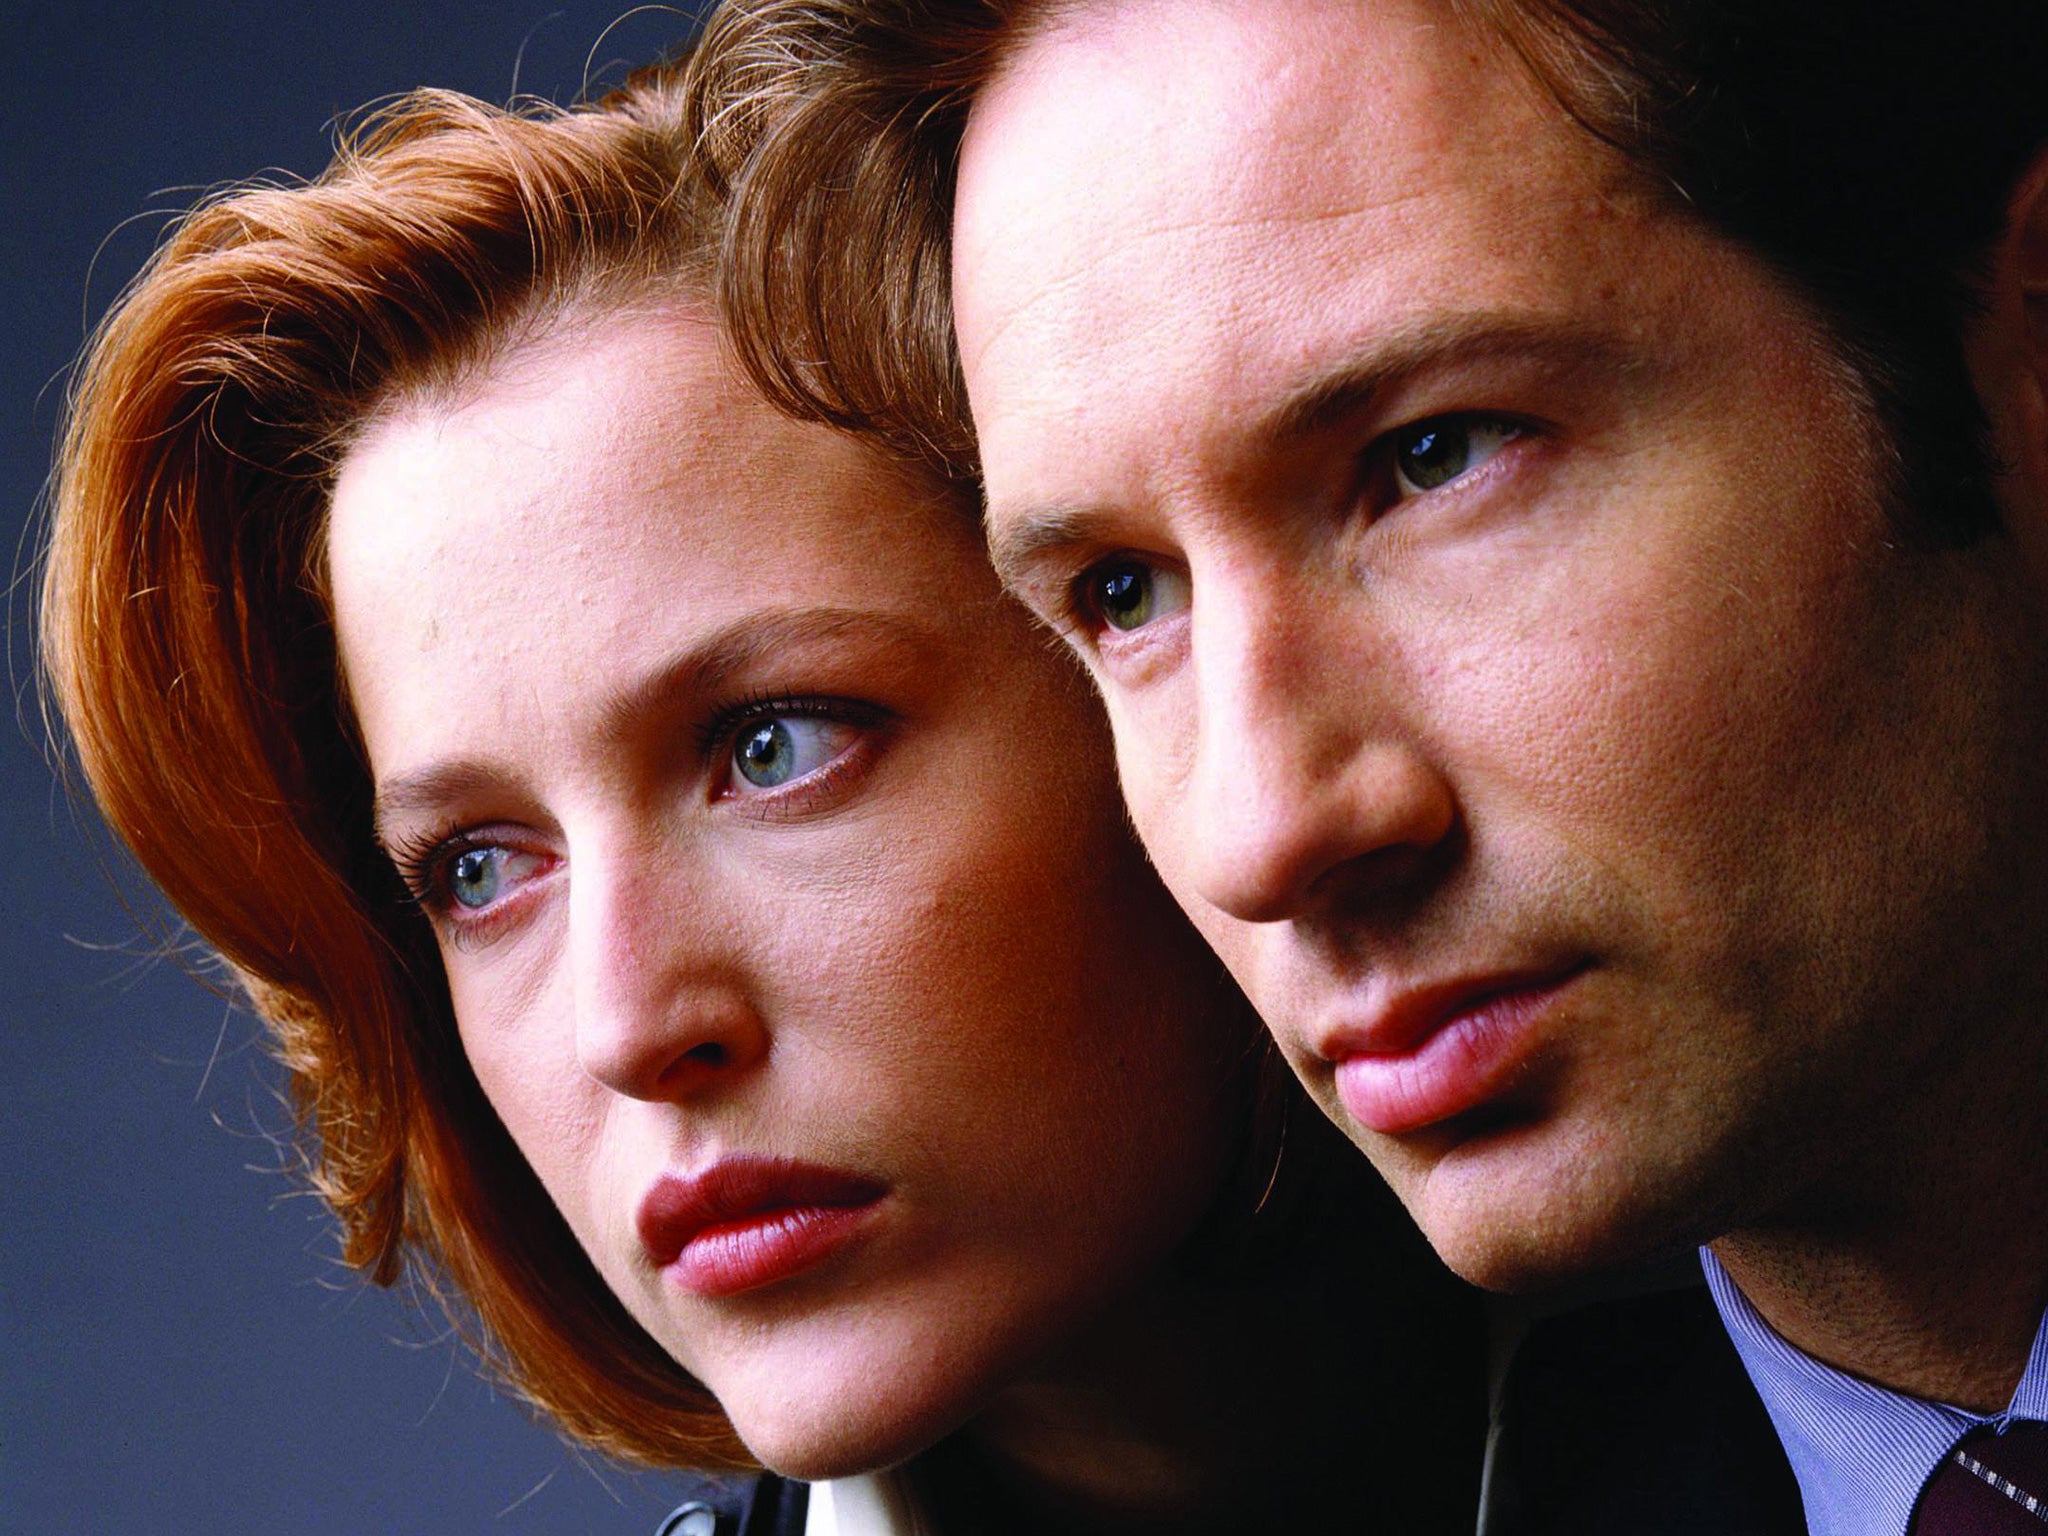 Gillian Anderson and David Duchovny in ‘The X-Files’